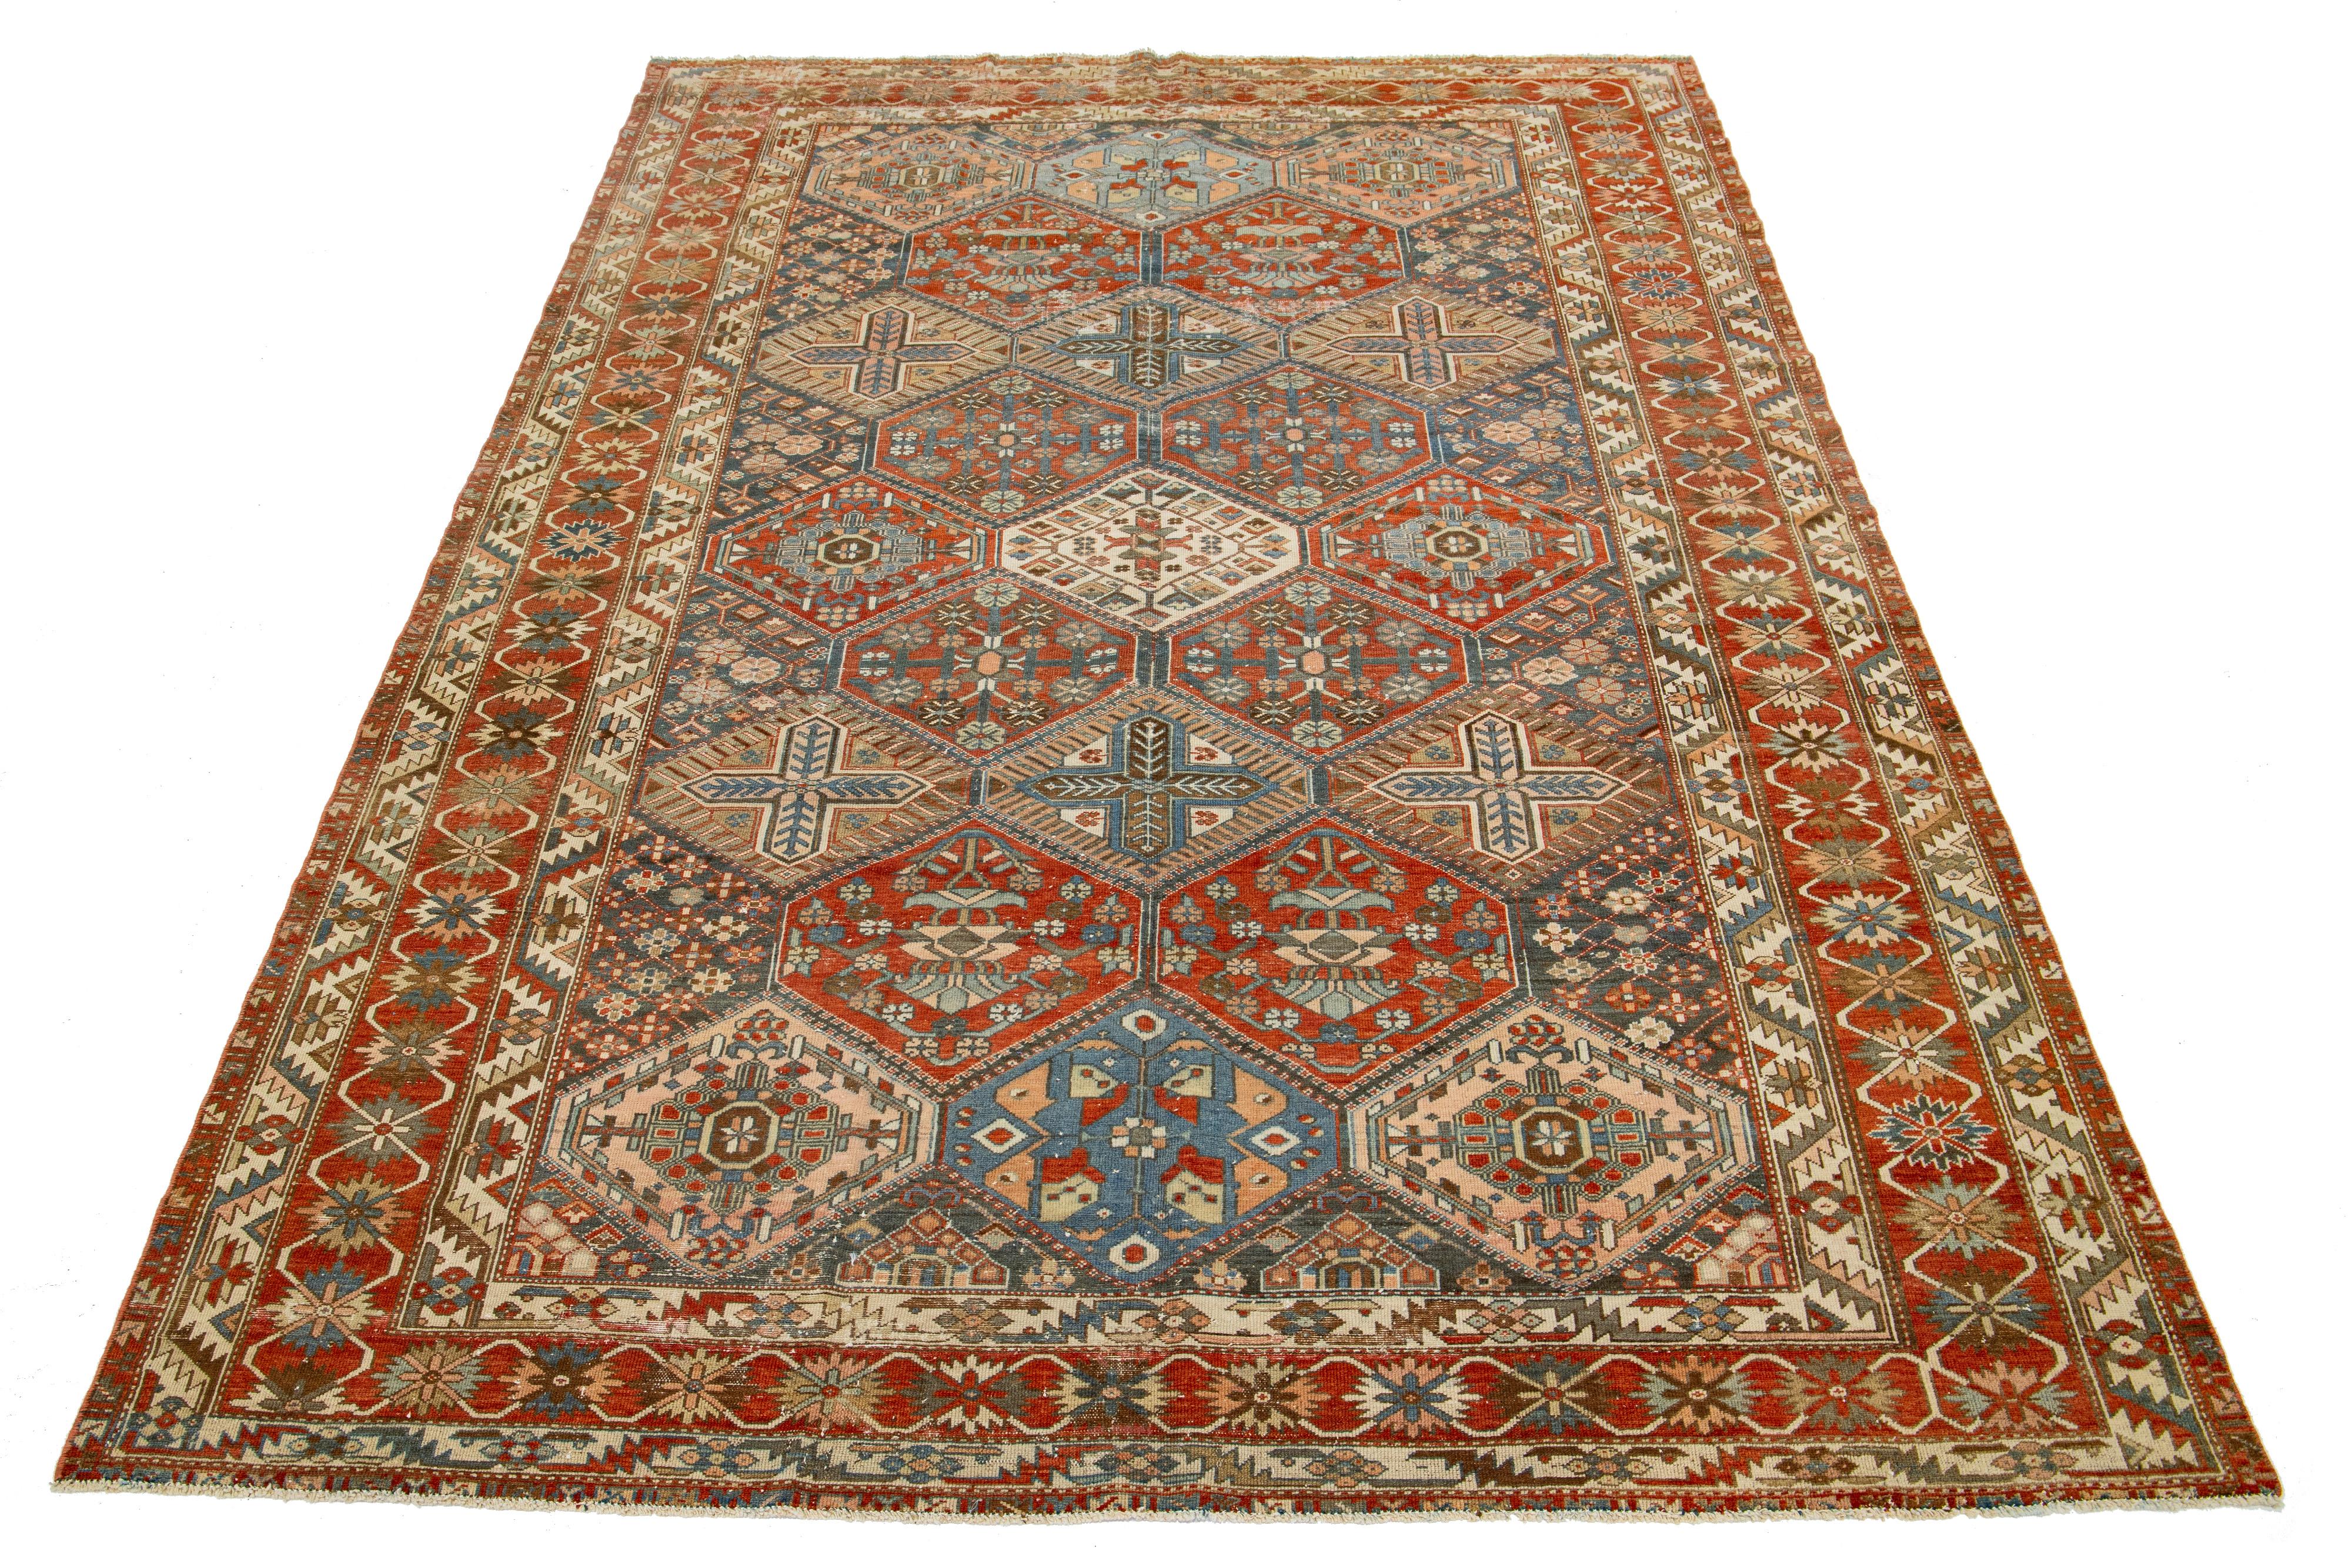 This beautiful Antique Bakhtiari hand-knotted wool rug features a gray-blue color field. It showcases a classic Persian design with blue, beige, and rust floral colors.

This rug measures 6'9